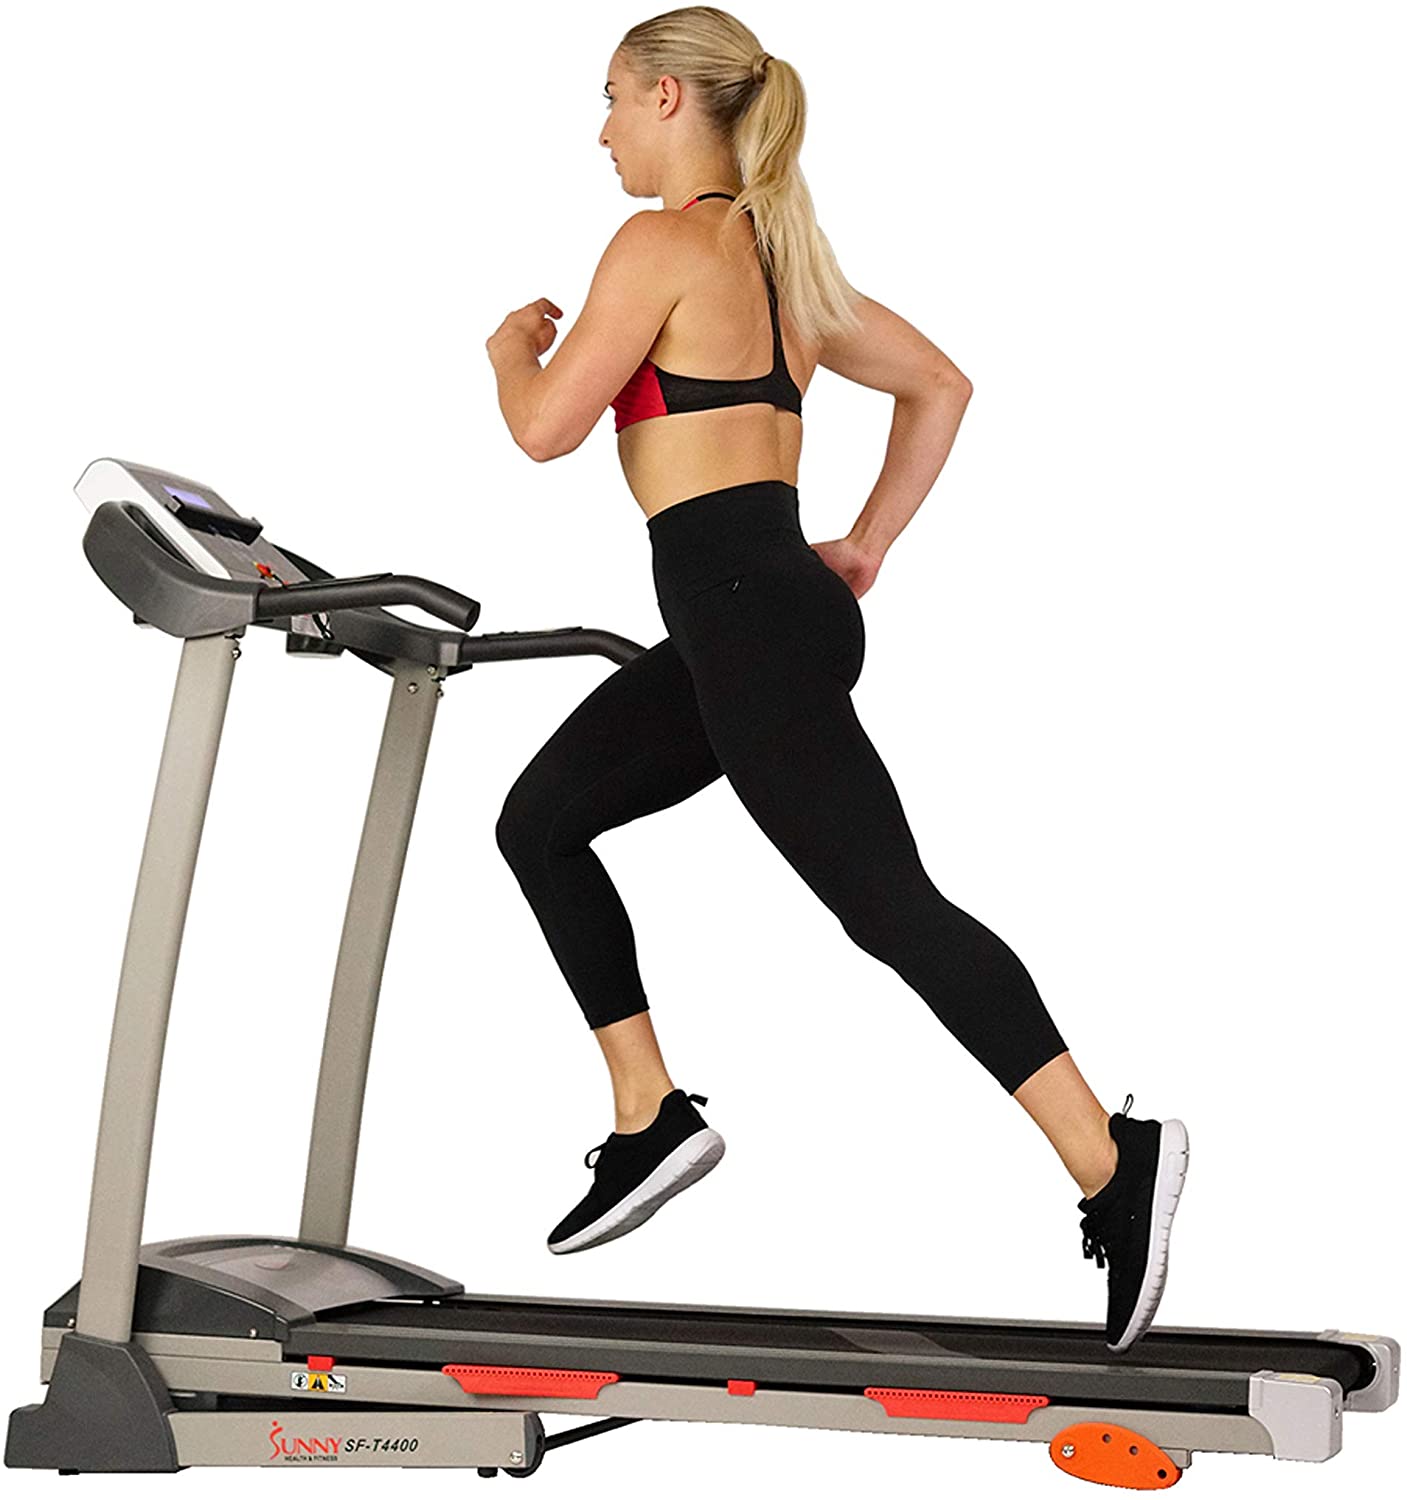 Sunny Health & Fitness Folding Treadmill with Device Holder, Shock Absorption and Incline